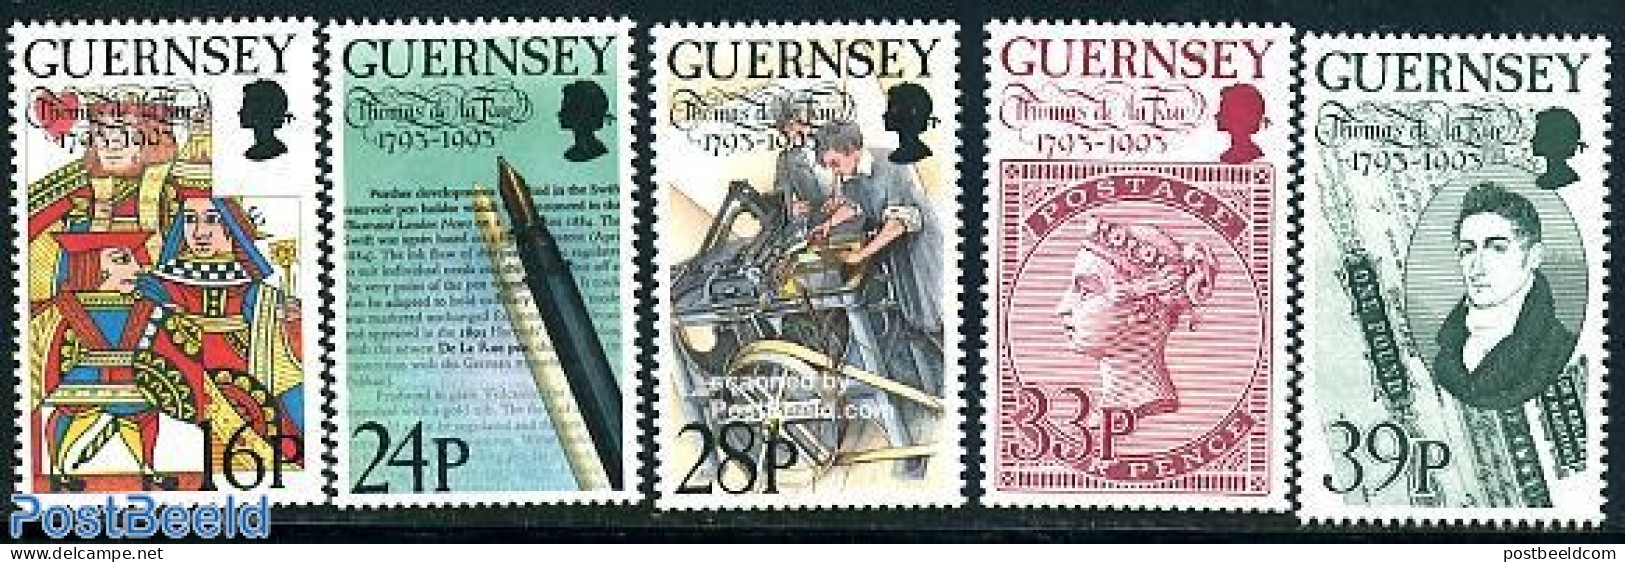 Guernsey 1993 Thomas De La Rue 5v, Mint NH, Sport - Playing Cards - Stamps On Stamps - Art - Authors - Printing - Timbres Sur Timbres